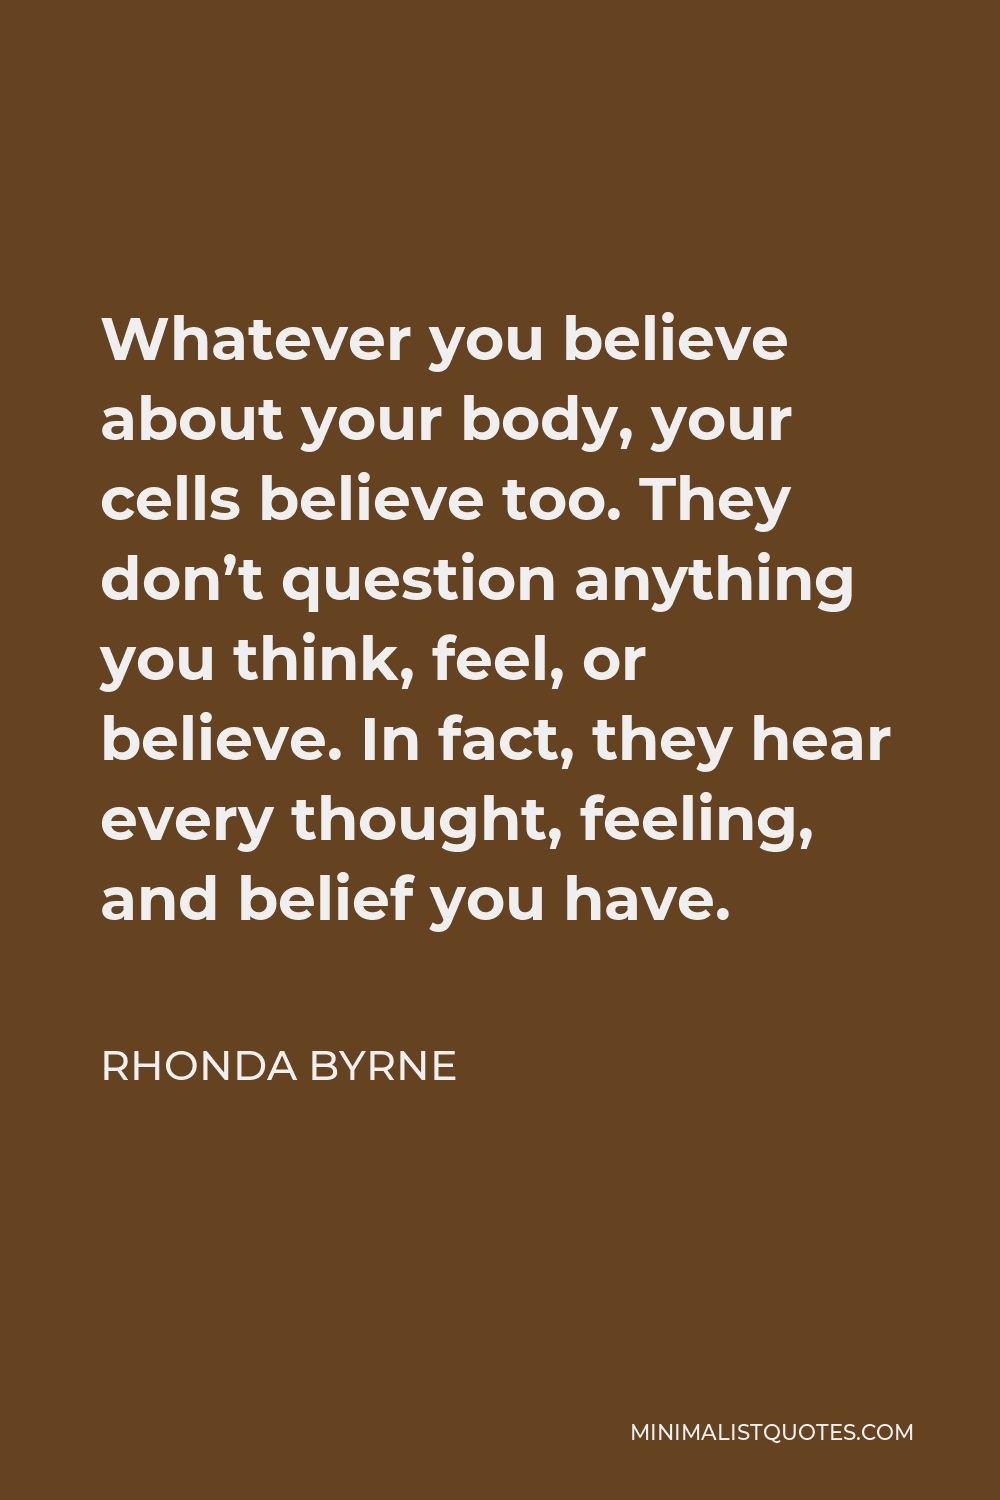 Rhonda Byrne Quote - Whatever you believe about your body, your cells believe too. They don’t question anything you think, feel, or believe. In fact, they hear every thought, feeling, and belief you have.